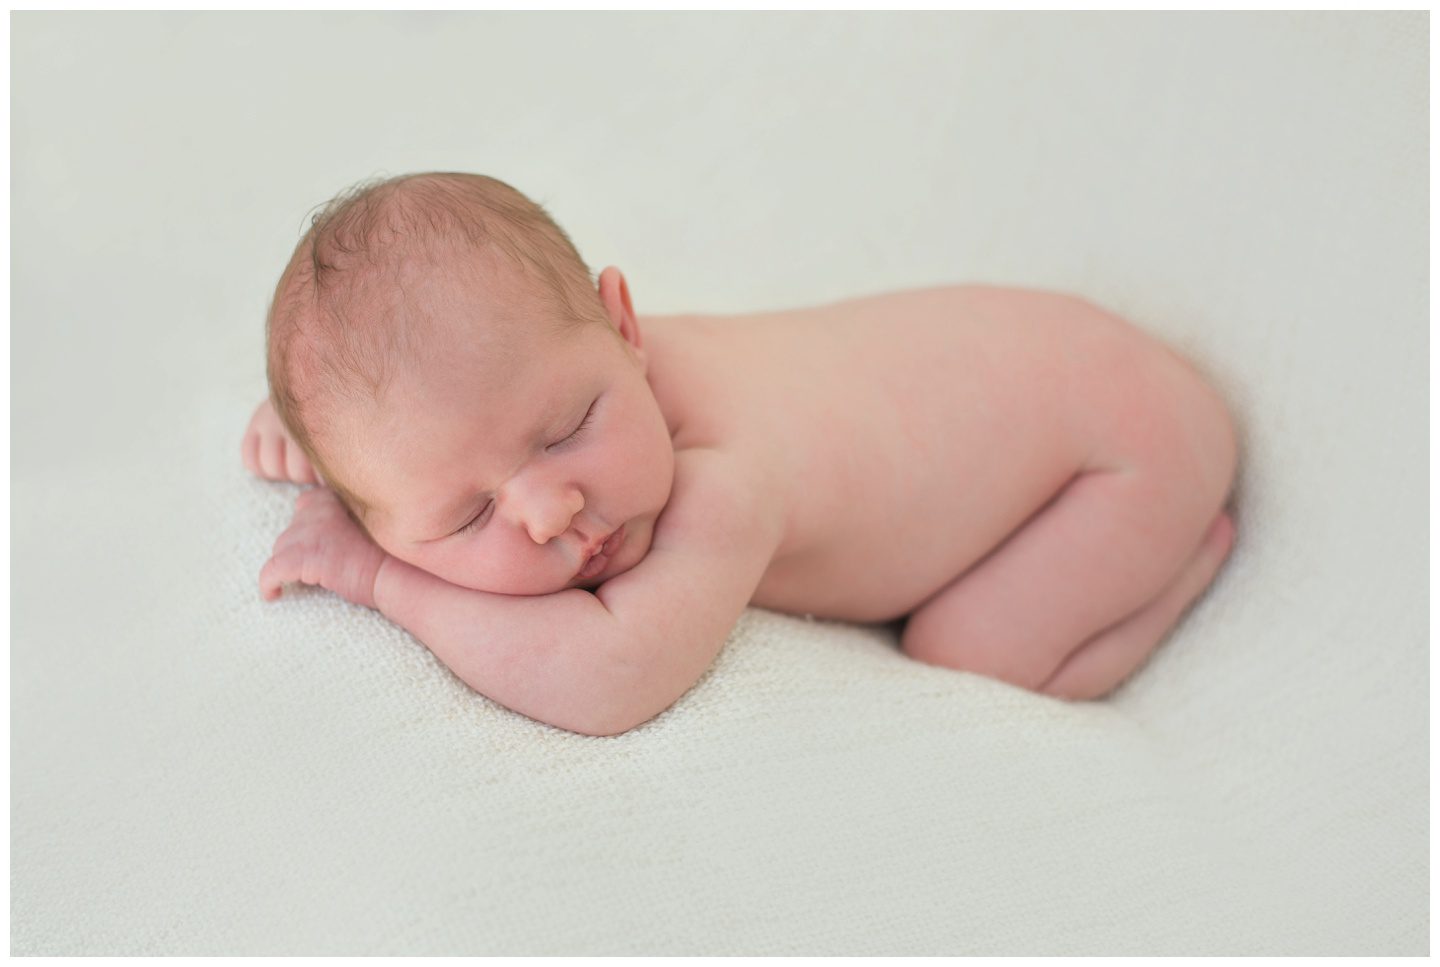 newborn baby girl laid on her tummy on a blanket during newborn photography session